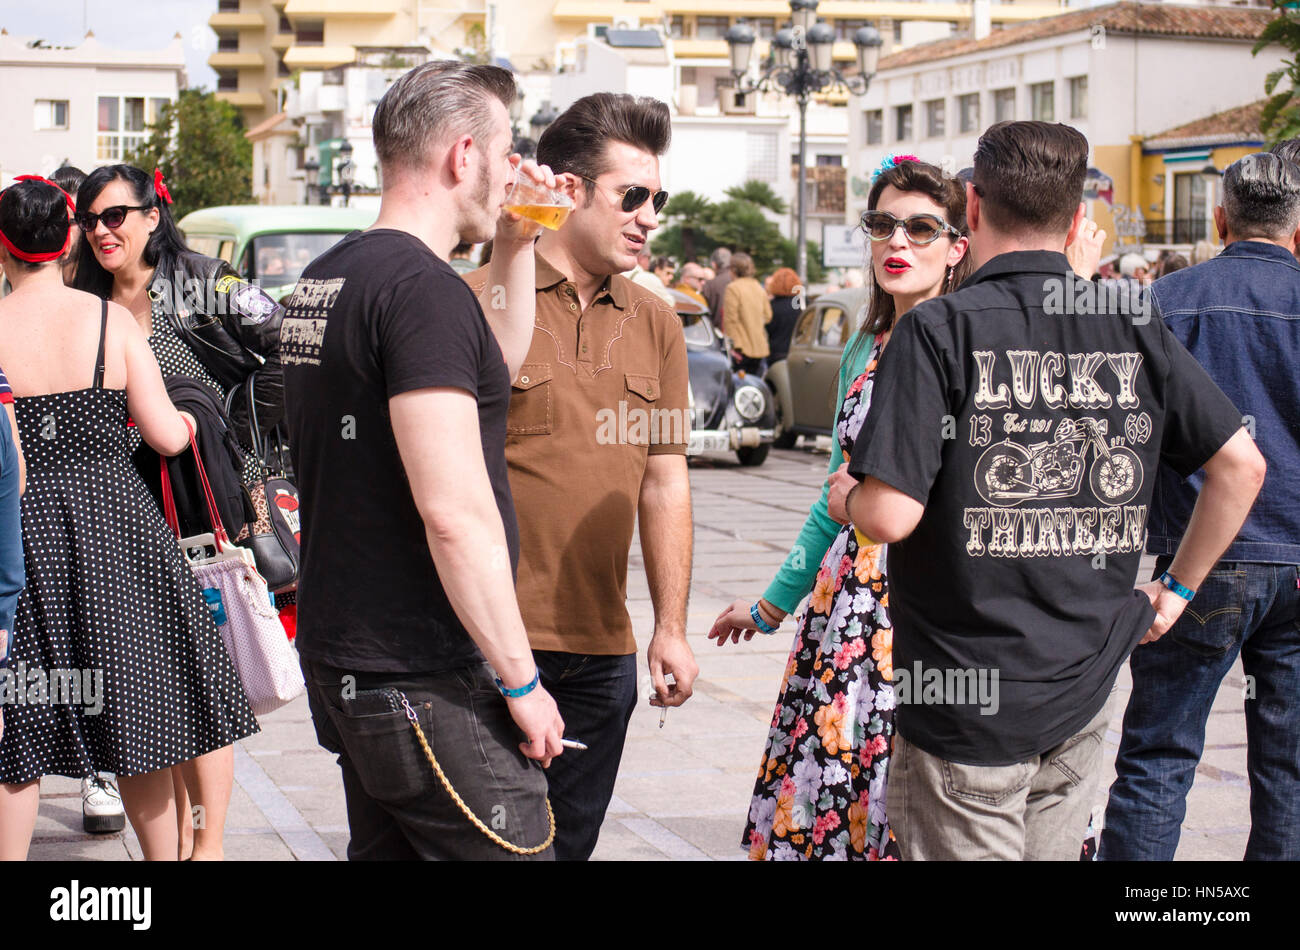 People in fifties style at 2016 Rockabilly festival, Rockin Race Jamboree,  Torremolinos, Andalusia, Spain Stock Photo - Alamy